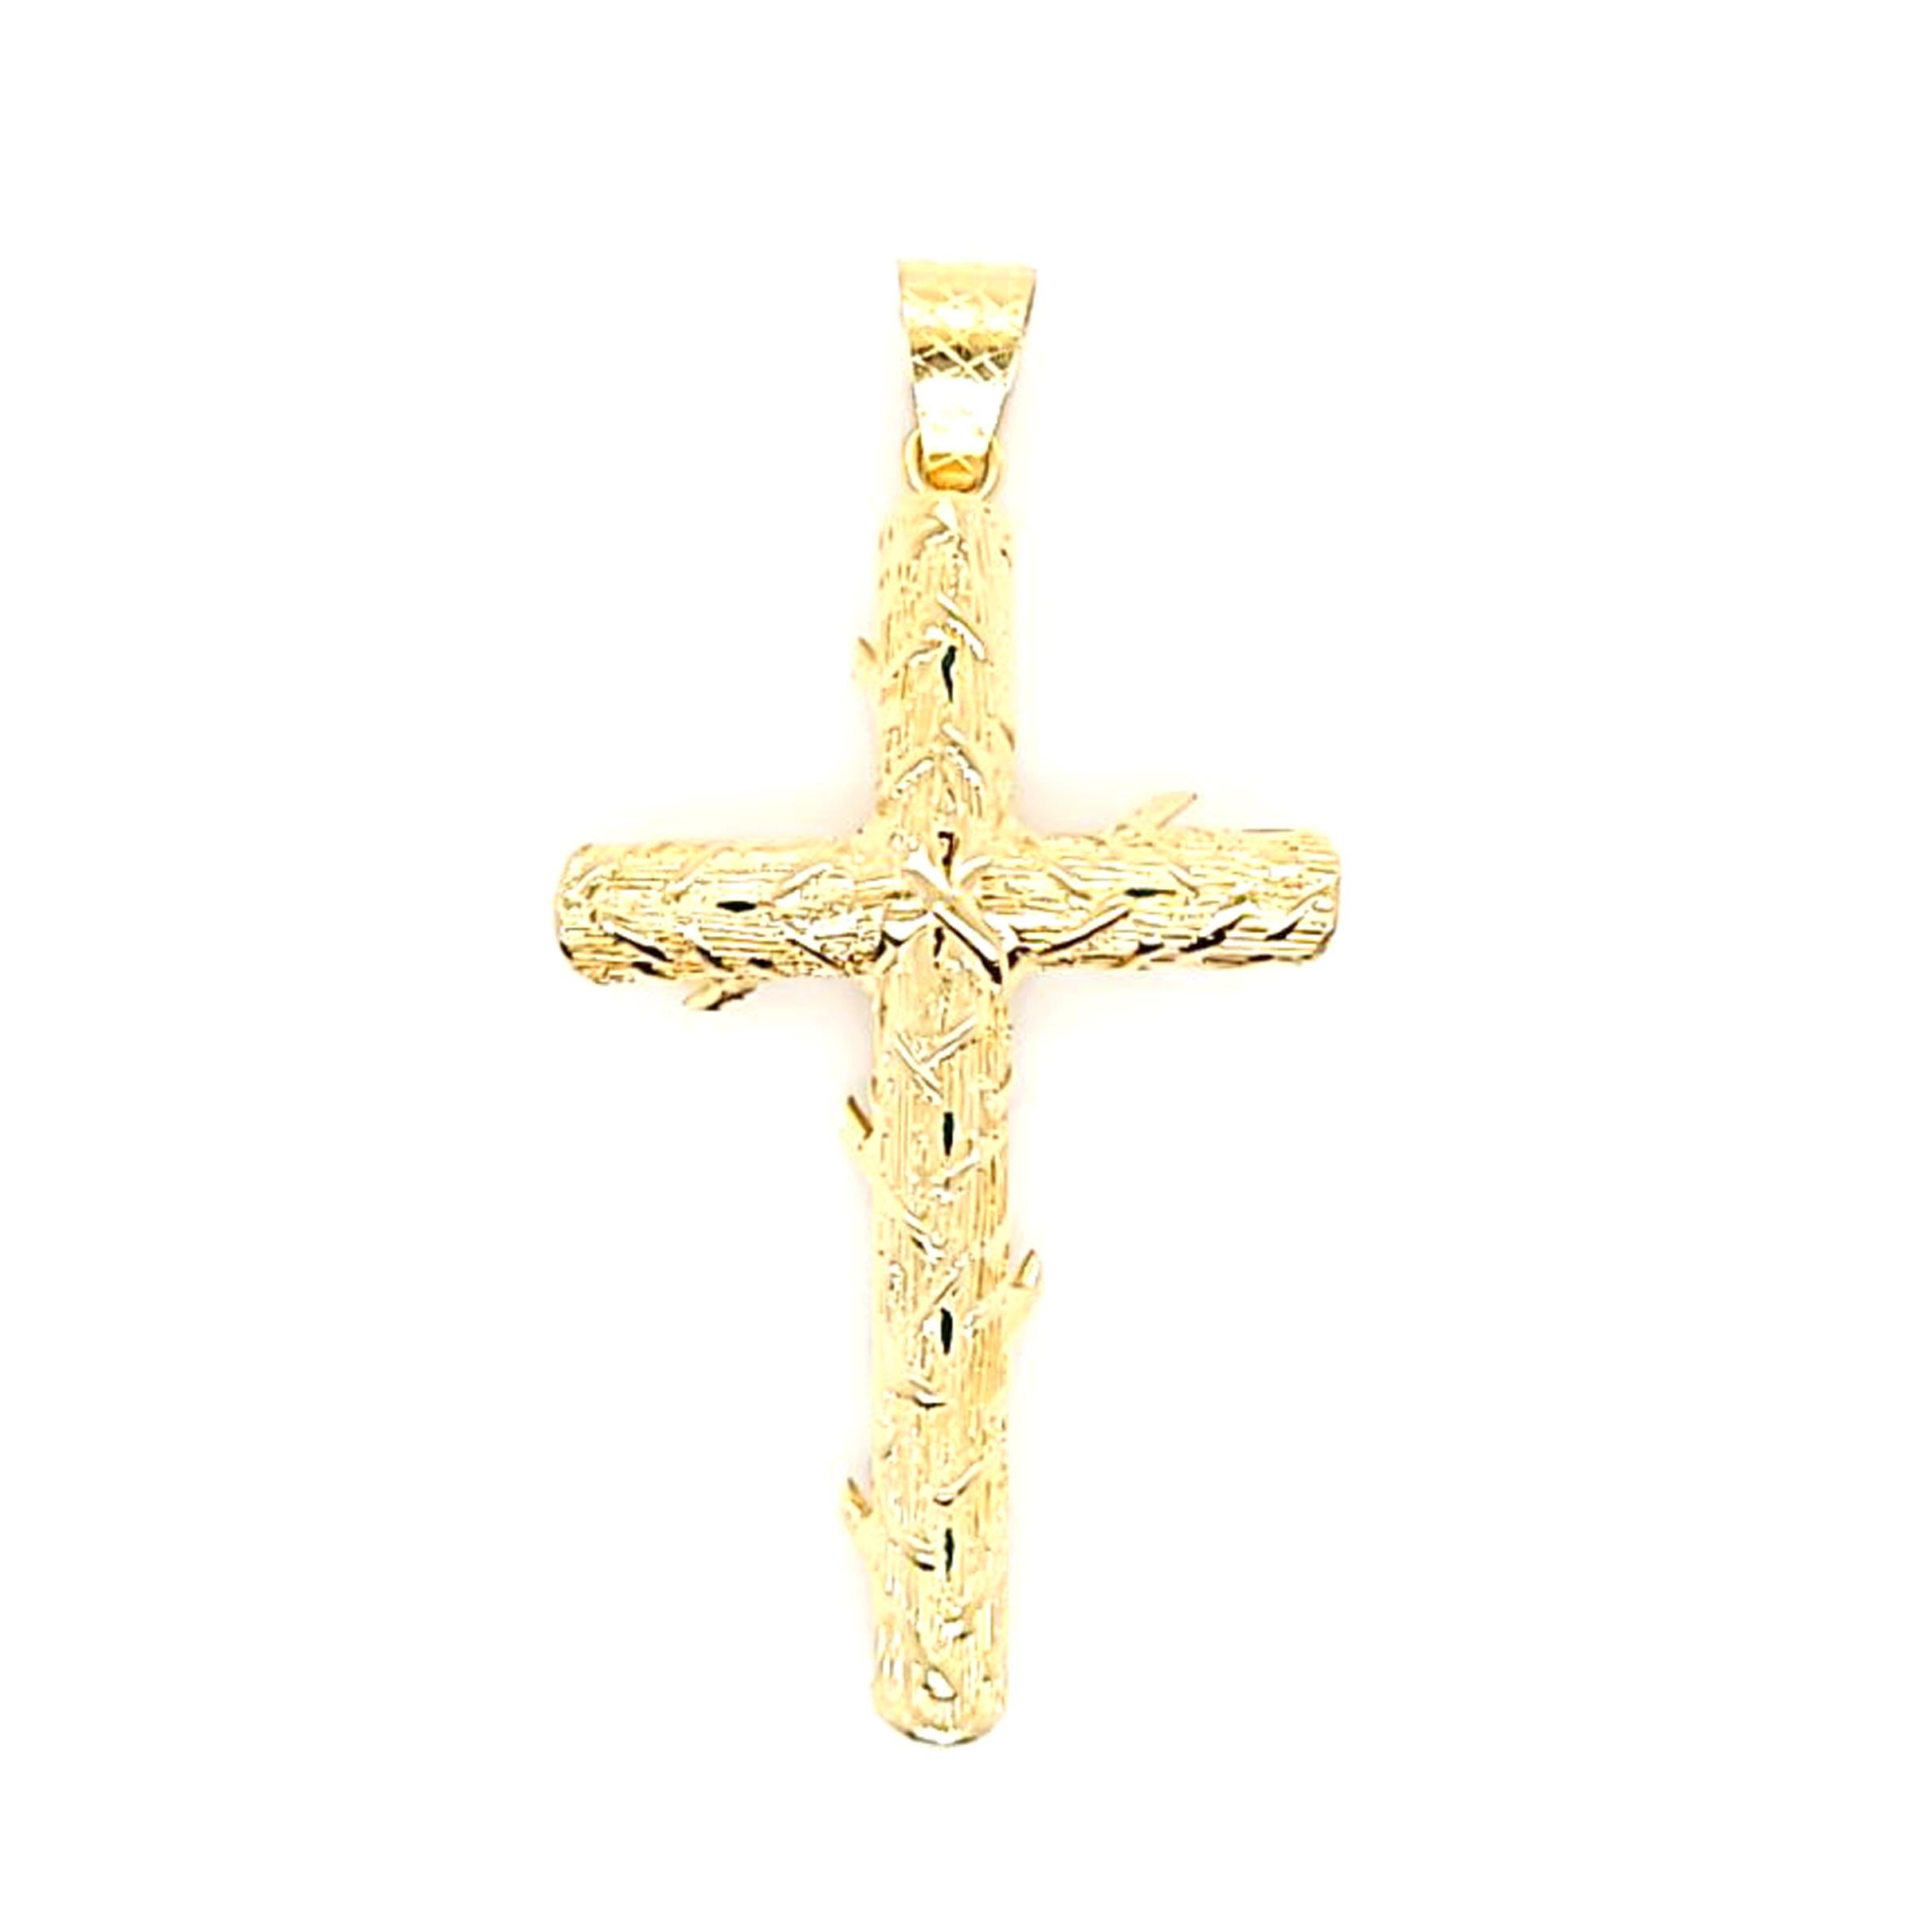 Vintage Yellow Gold Emerald Cross with Bark Finish In Good Condition For Sale In Coral Gables, FL